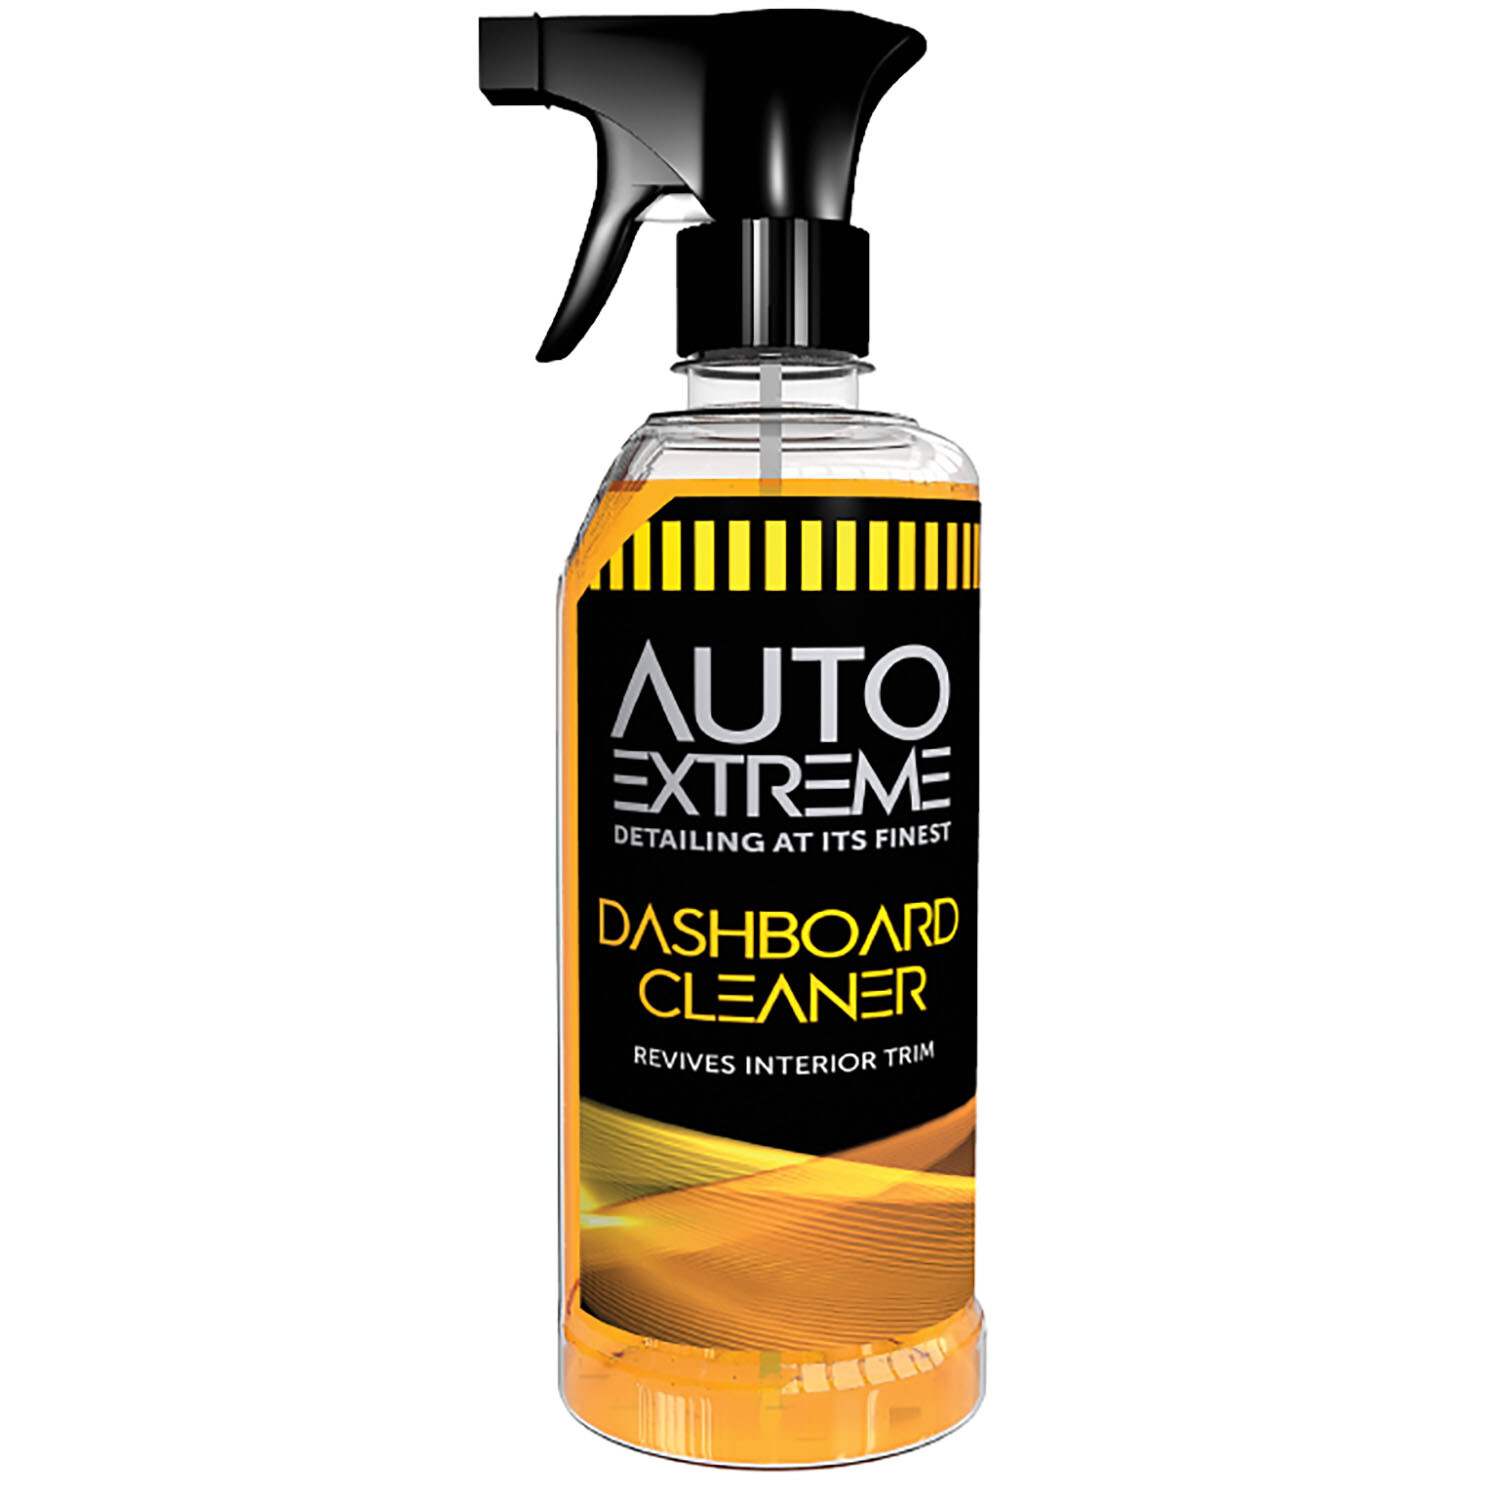 Auto Extreme Dashboard Cleaner Image